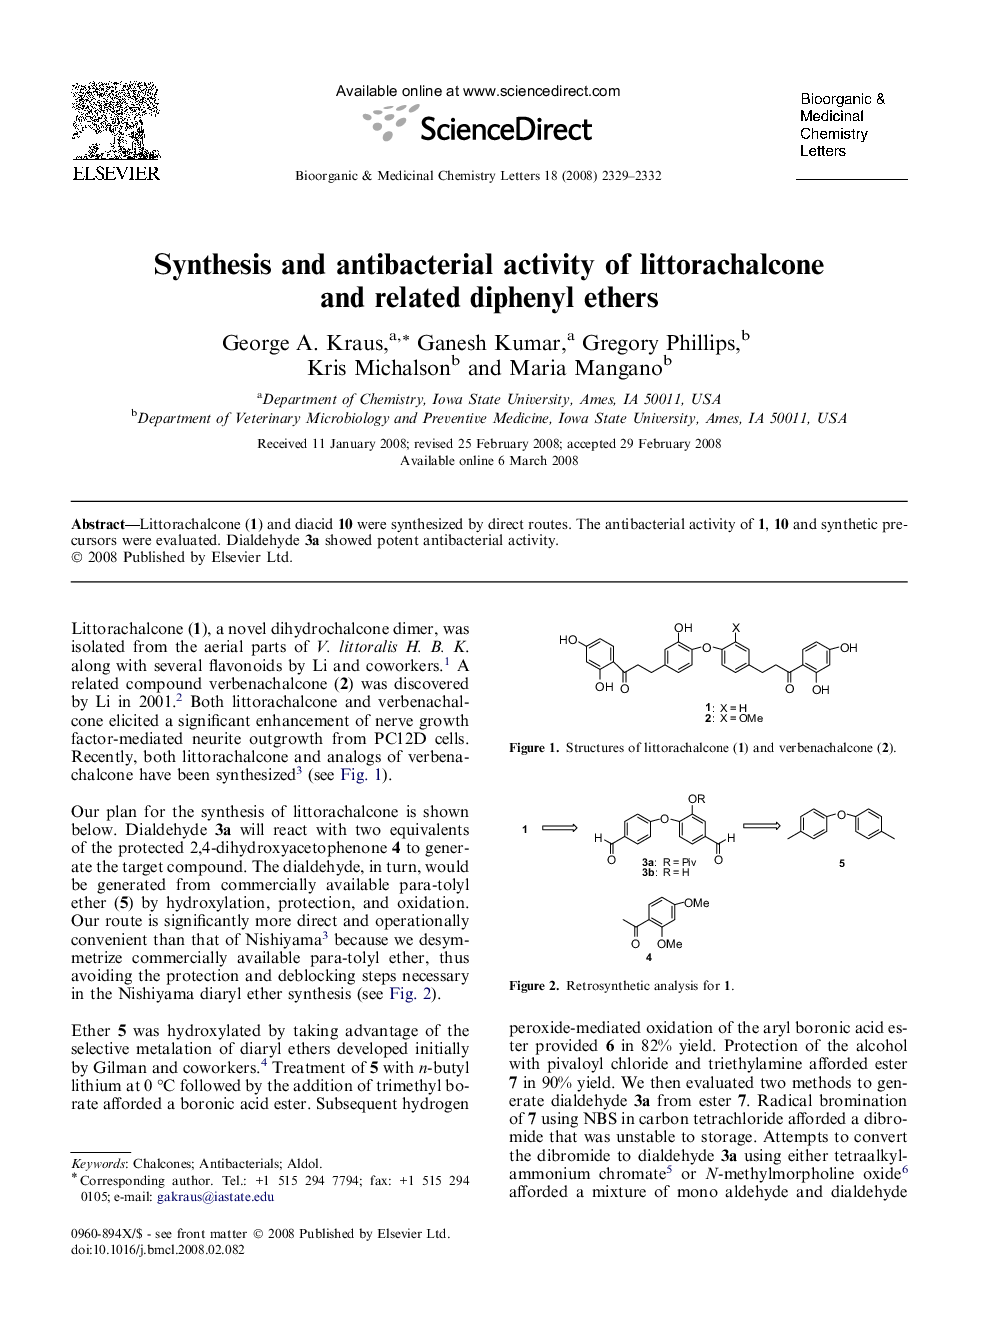 Synthesis and antibacterial activity of littorachalcone and related diphenyl ethers